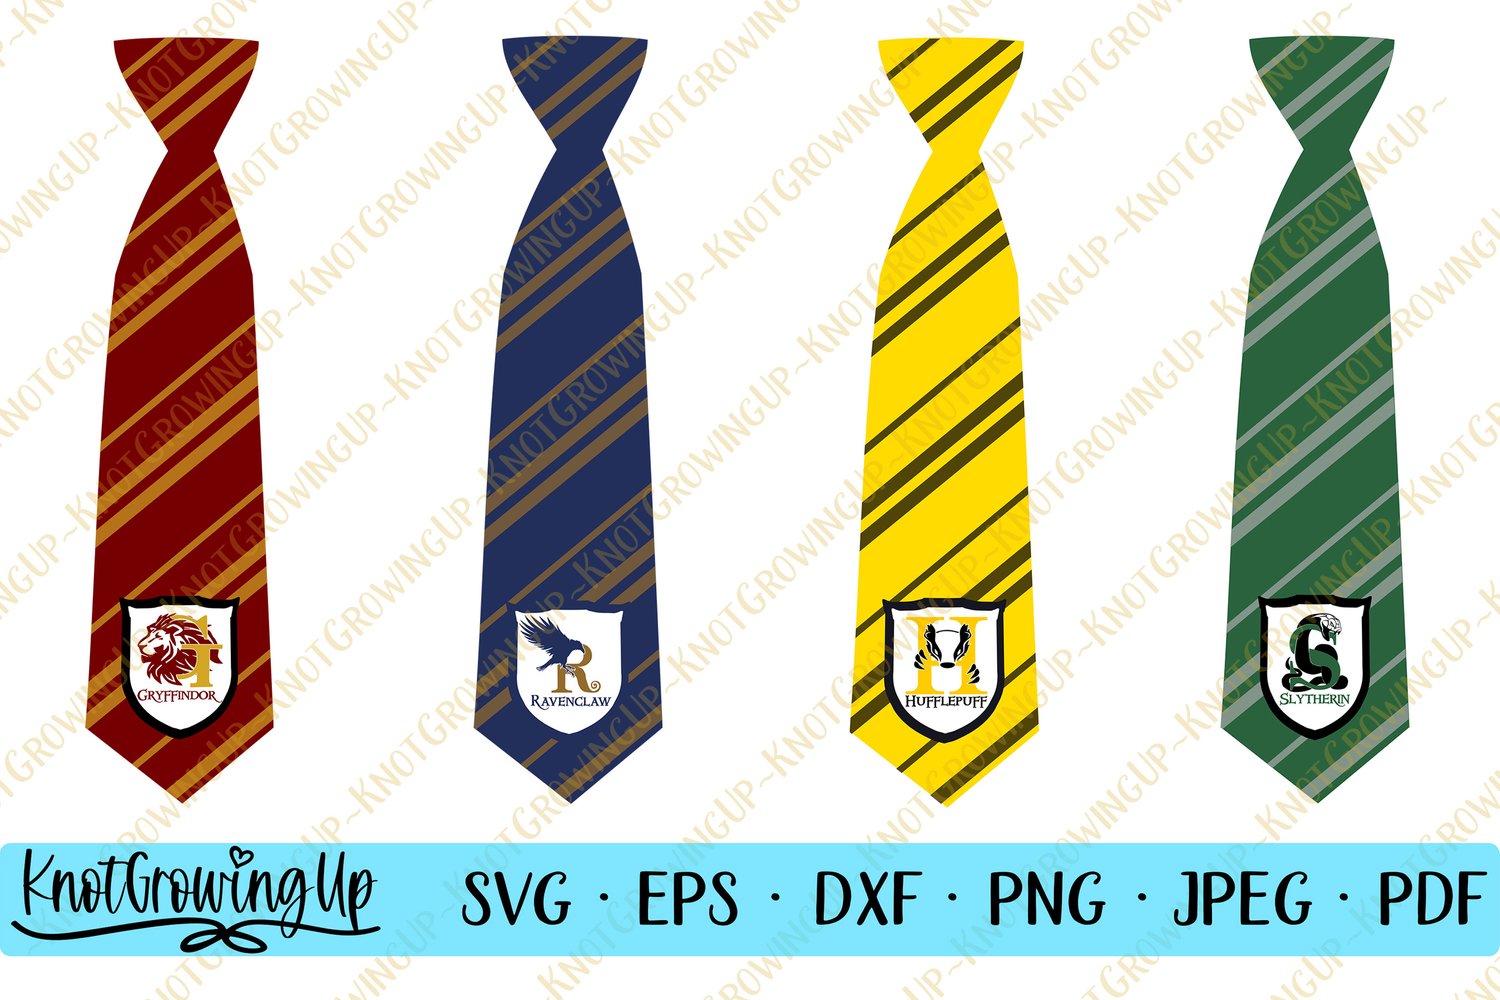 Harry Potter Hogwarts House Ties with Shield SVG — KnotGrowingUp ...